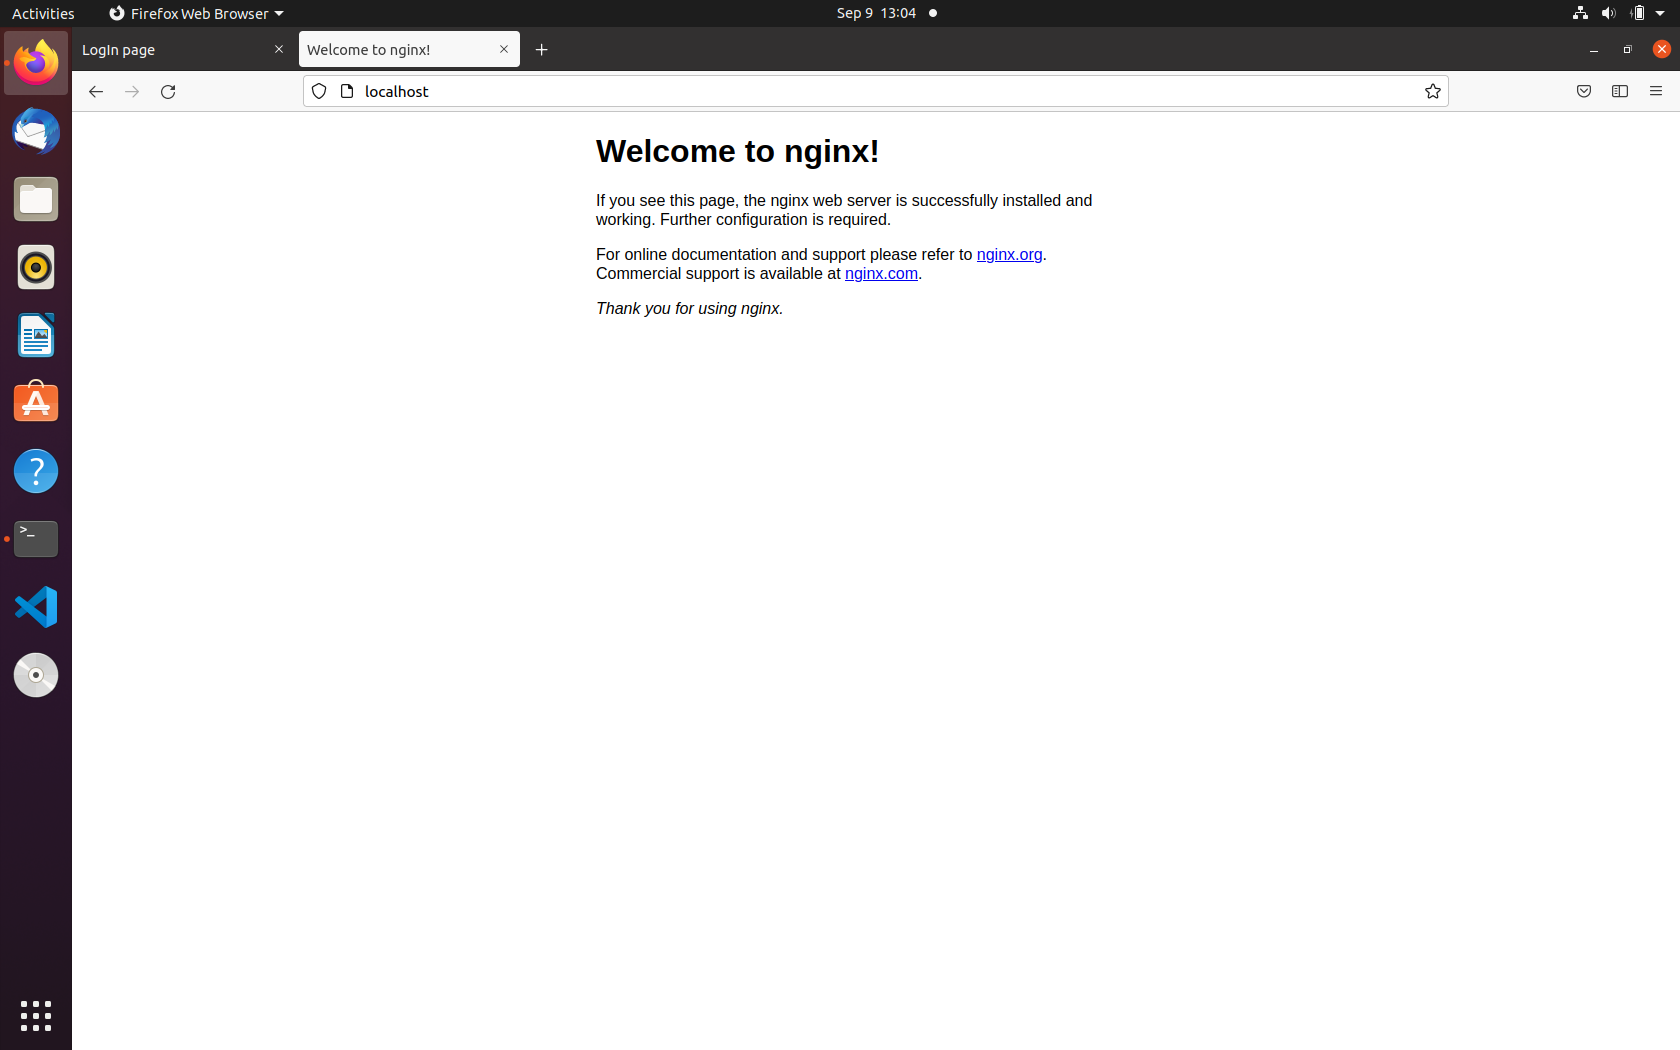 nginx-welcome-page.png